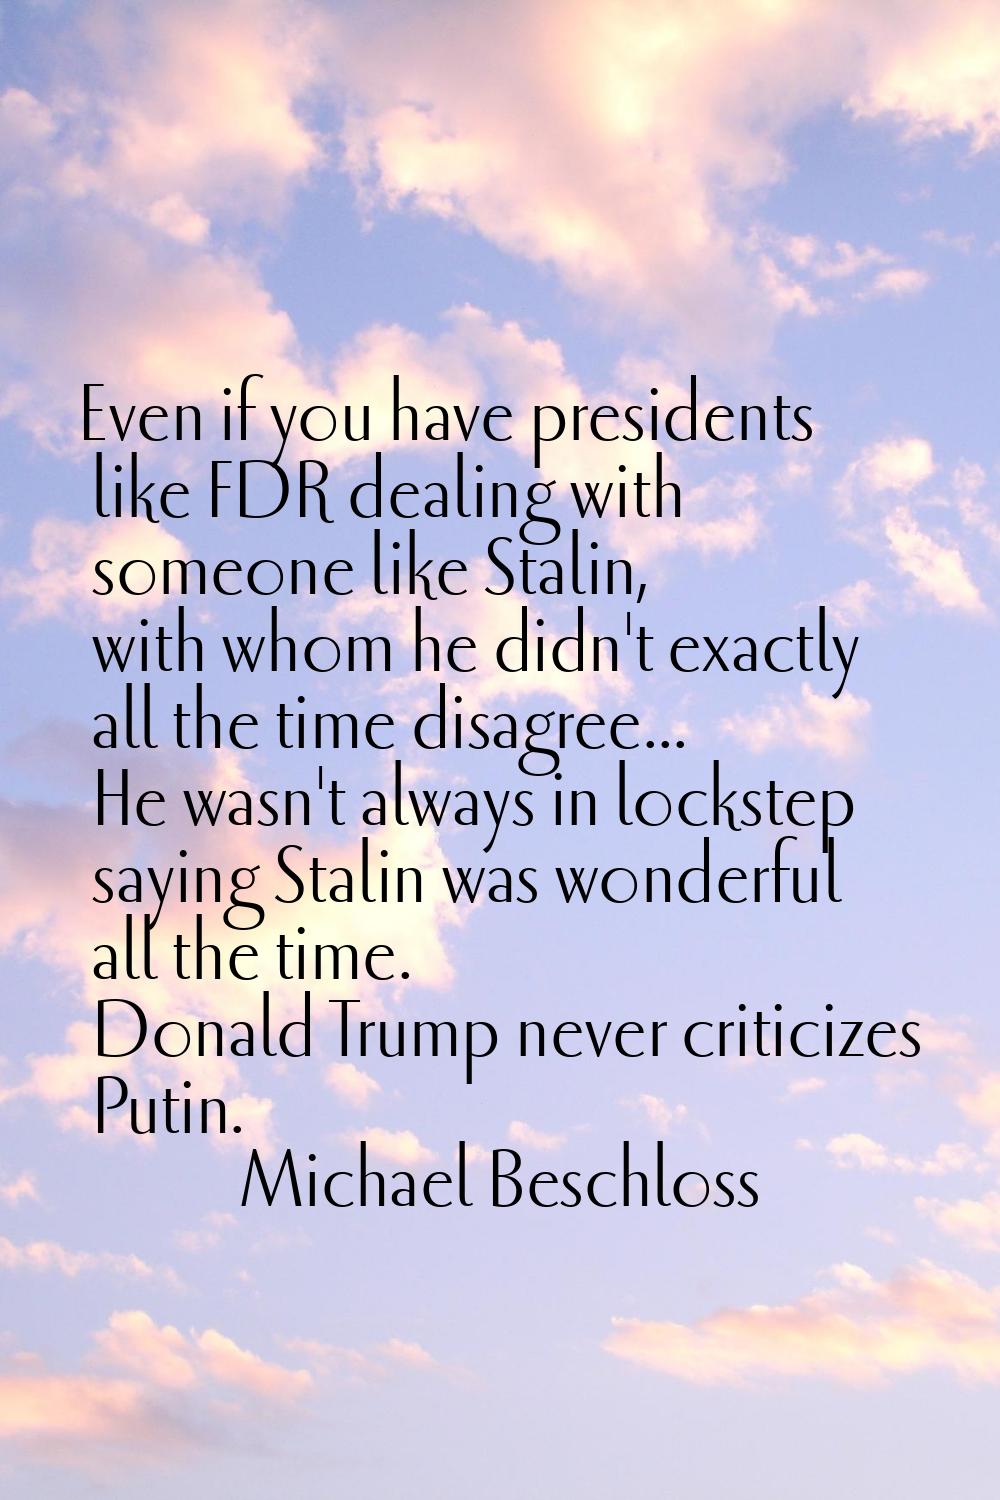 Even if you have presidents like FDR dealing with someone like Stalin, with whom he didn't exactly 